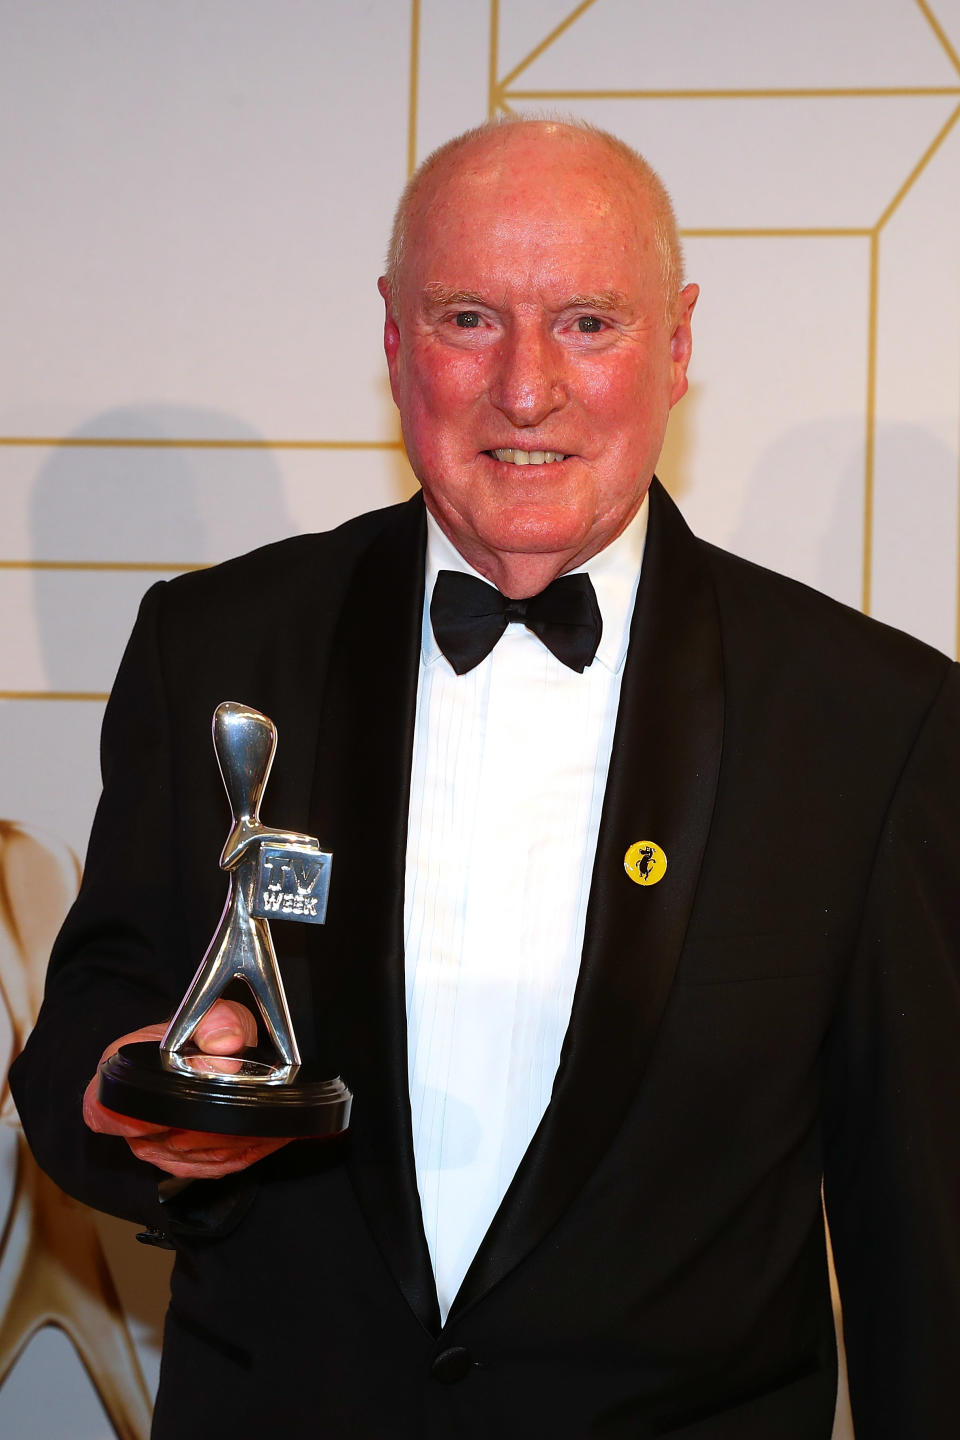 Ray Meagher poses with the award for most popular actor at the 60th Annual Logie Awards at The Star Gold Coast on July 1, 2018 in Gold Coast, Australia